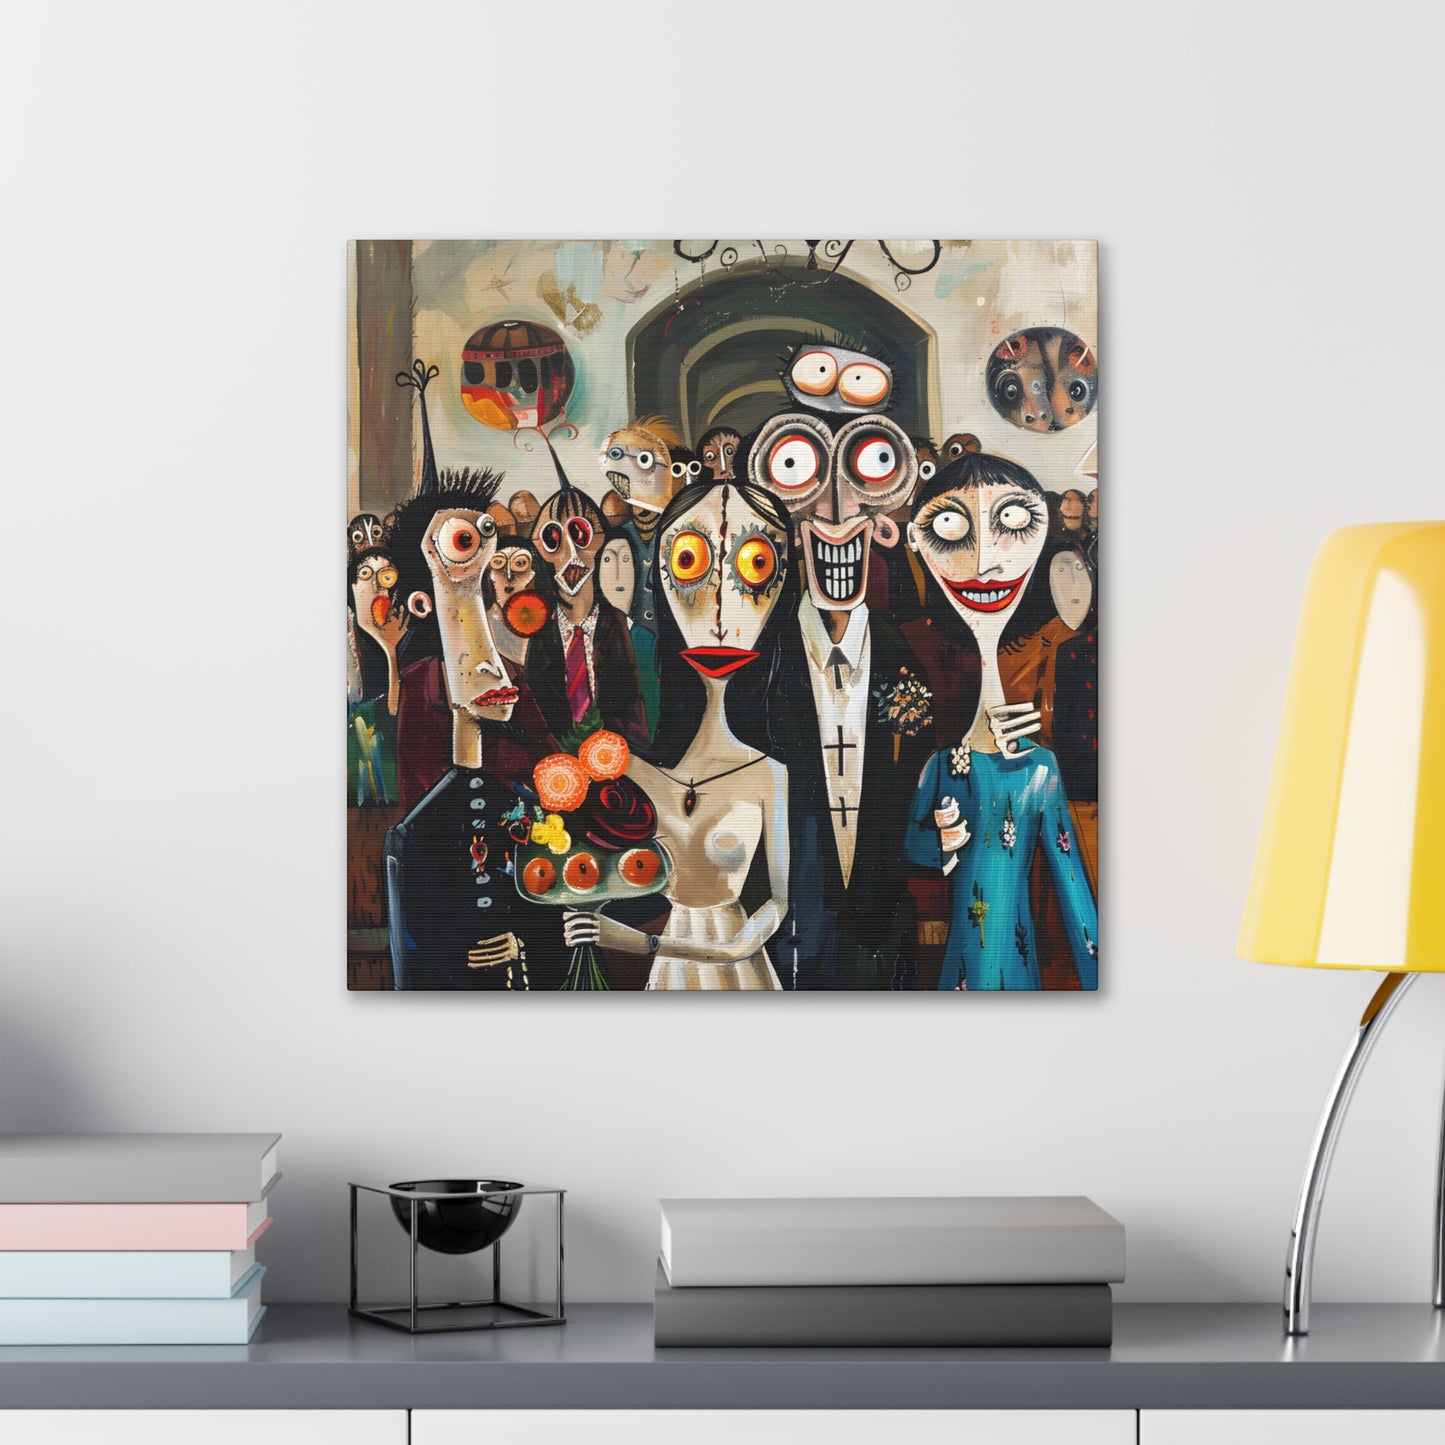 in situ Whimsical wedding scene with caricatured bride and groom, surrounded by guests with exaggerated, comical expressions, set against a backdrop of abstract and surreal elements